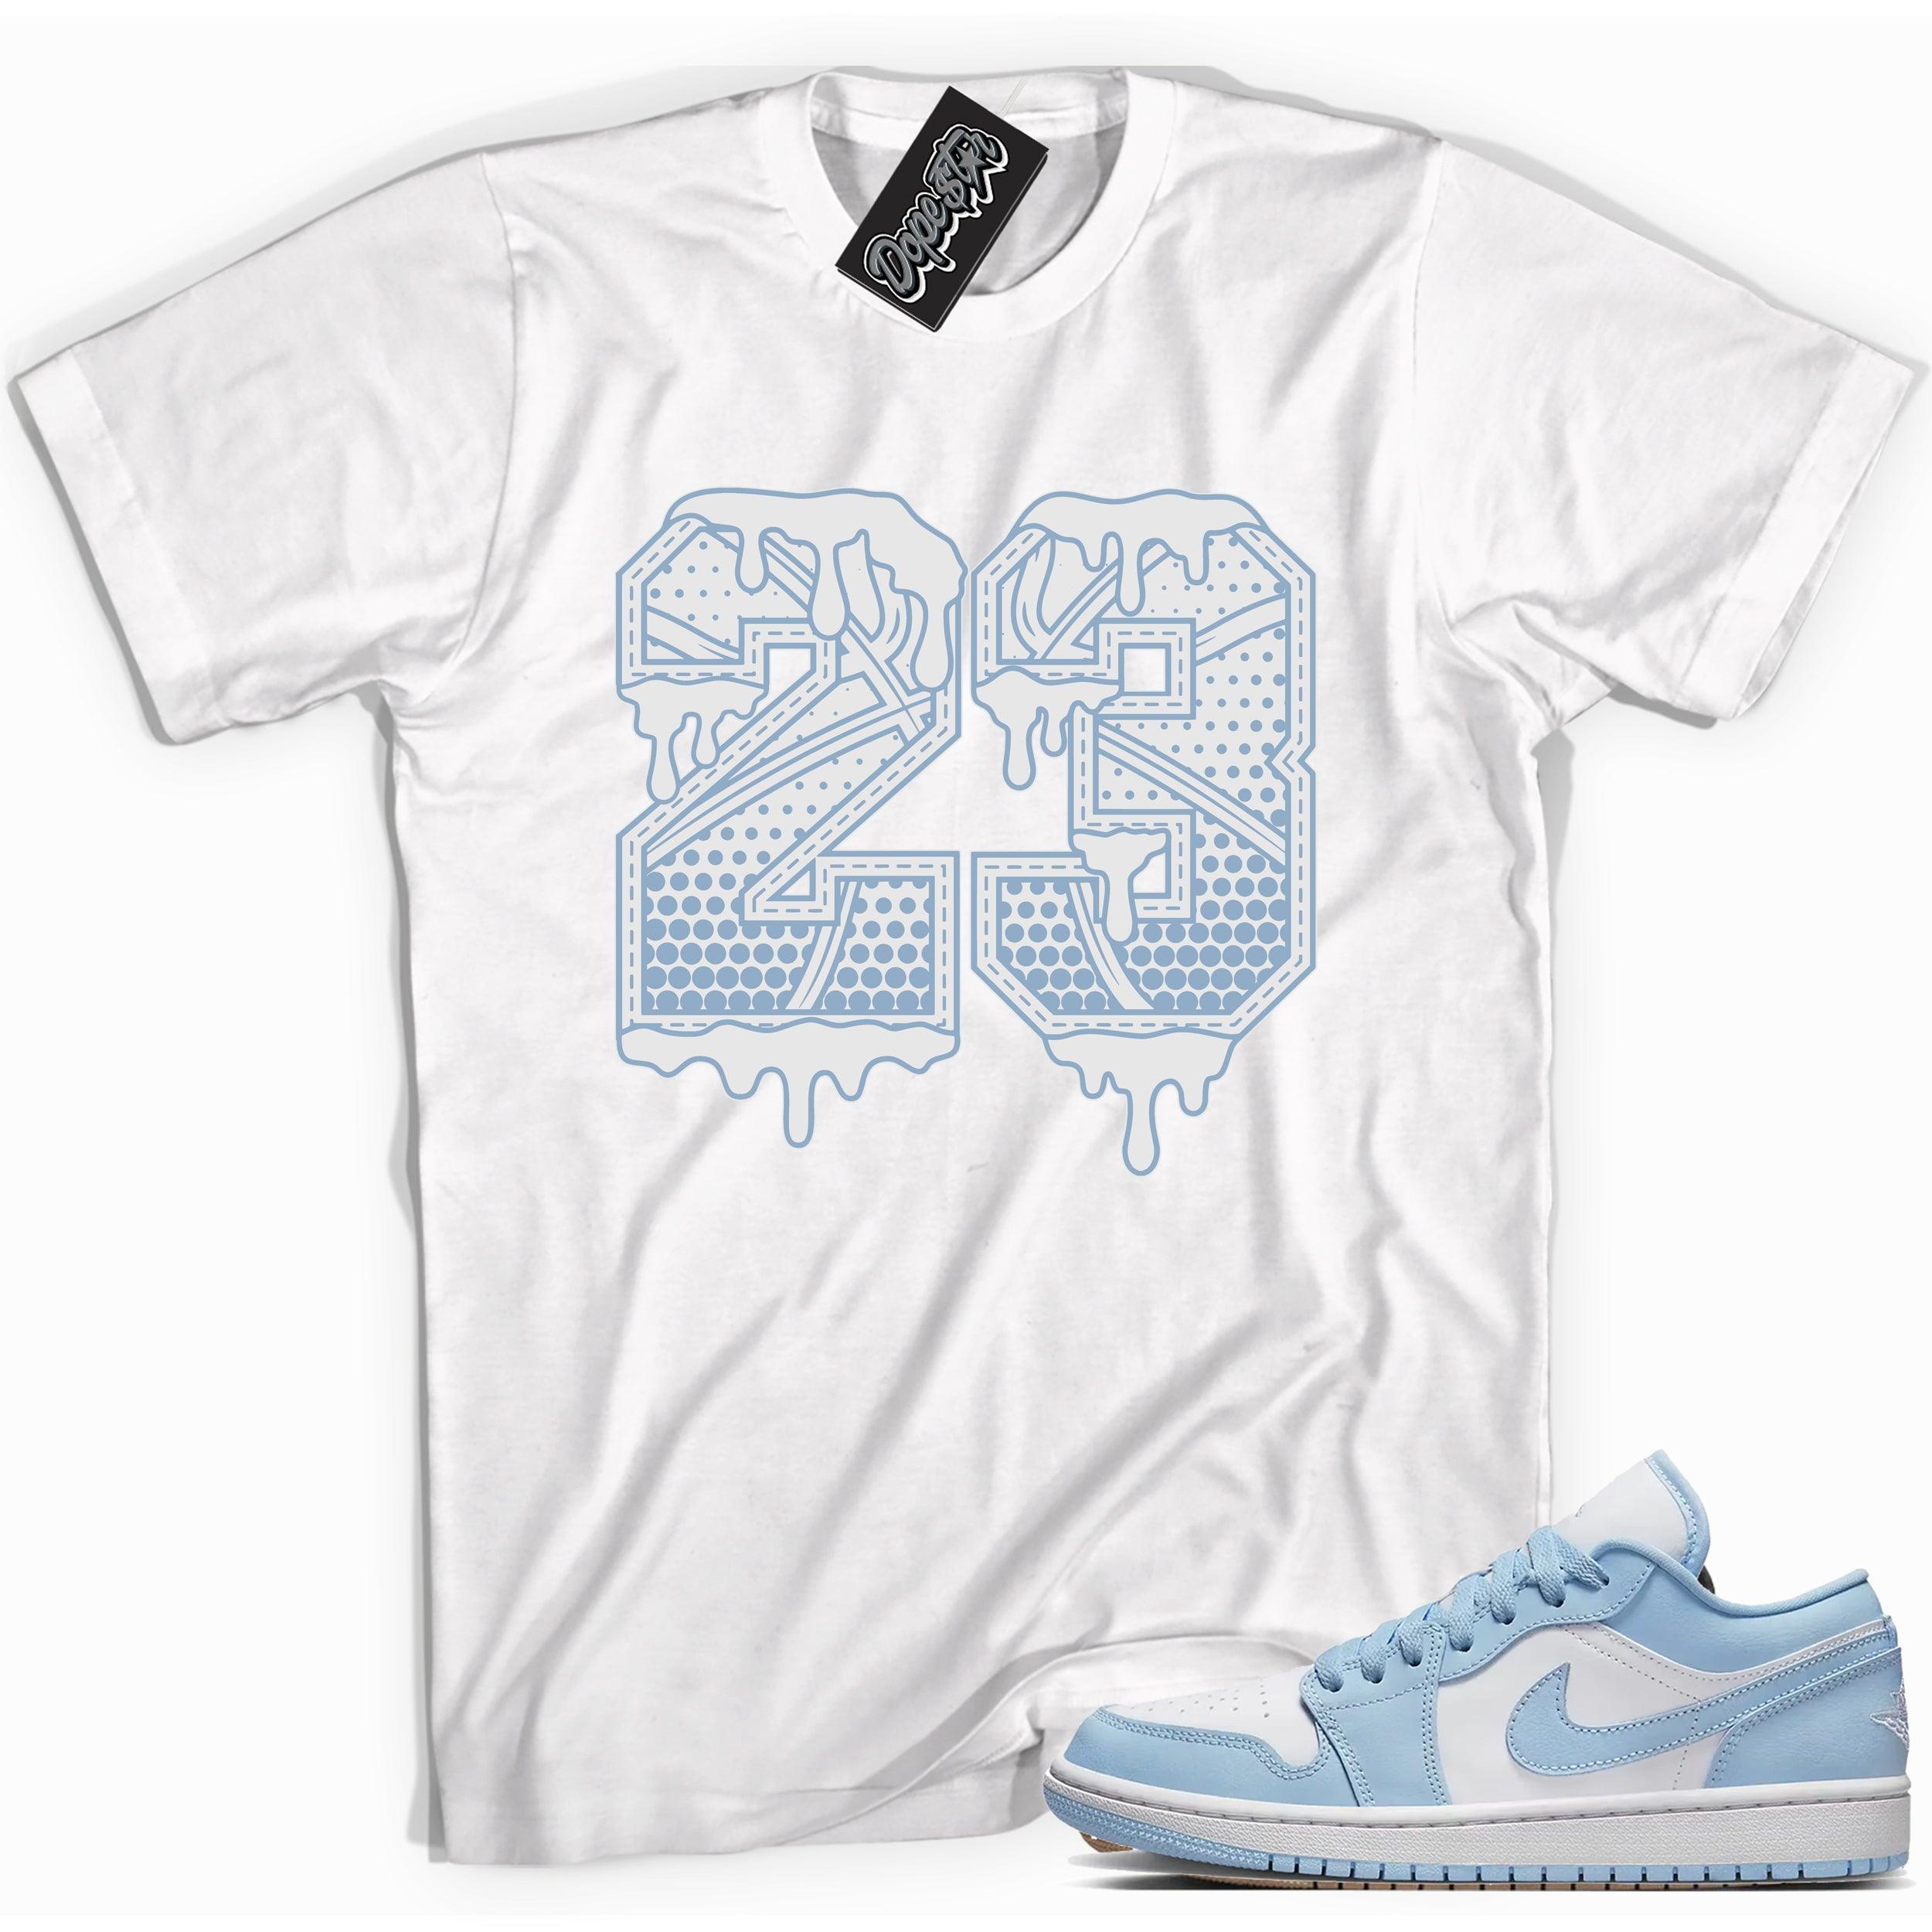 Cool White tee With "23 Ball" that perfectly matches Air Jordan 1 Low Aluminum Sneakers